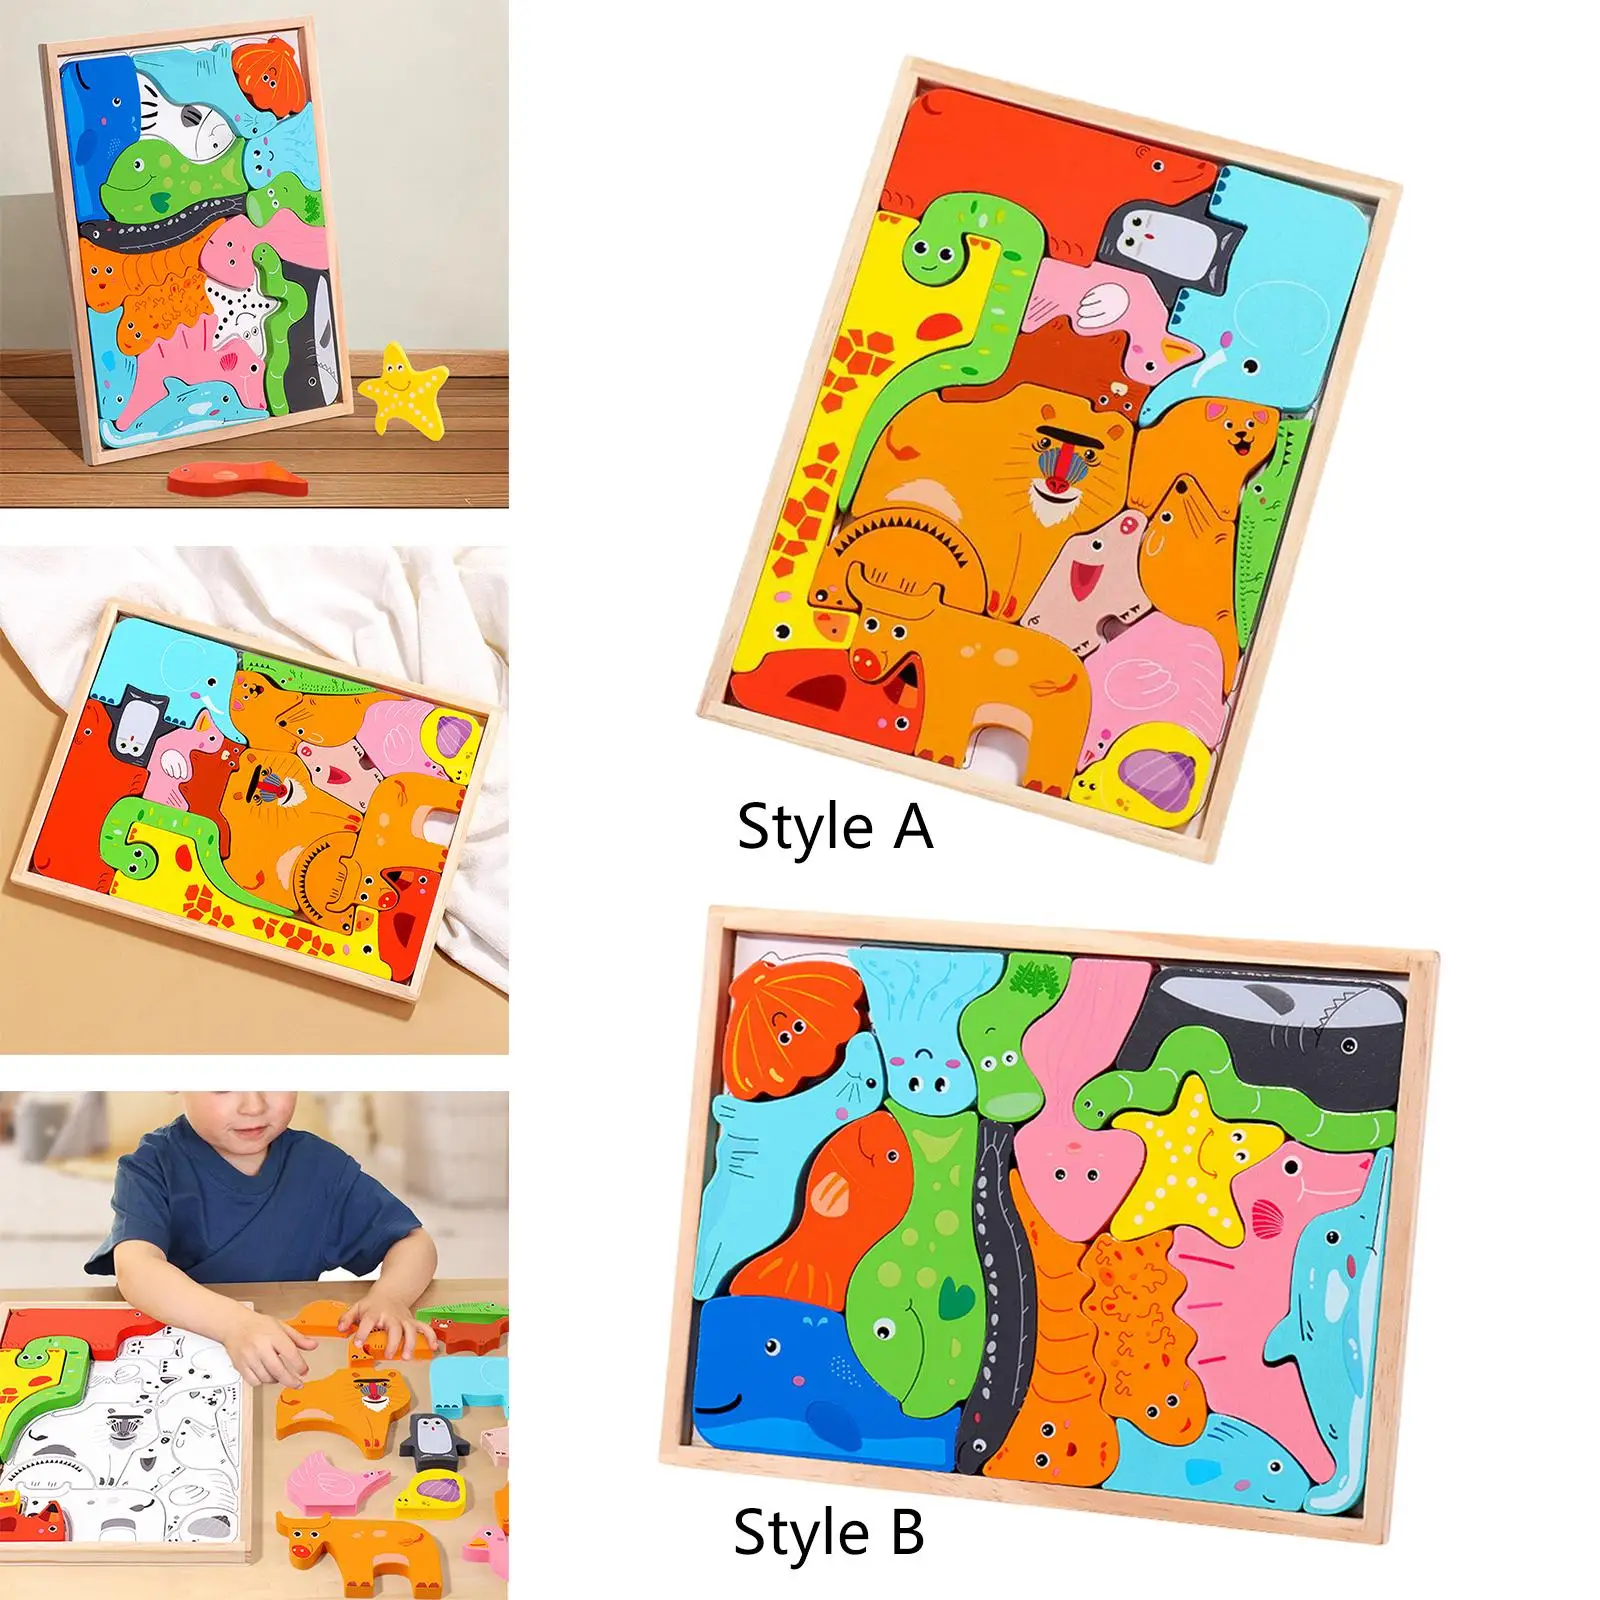 Wooden Animal Puzzles Early Leaning Education Toy Animal Jigsaw Puzzles for Boy Children